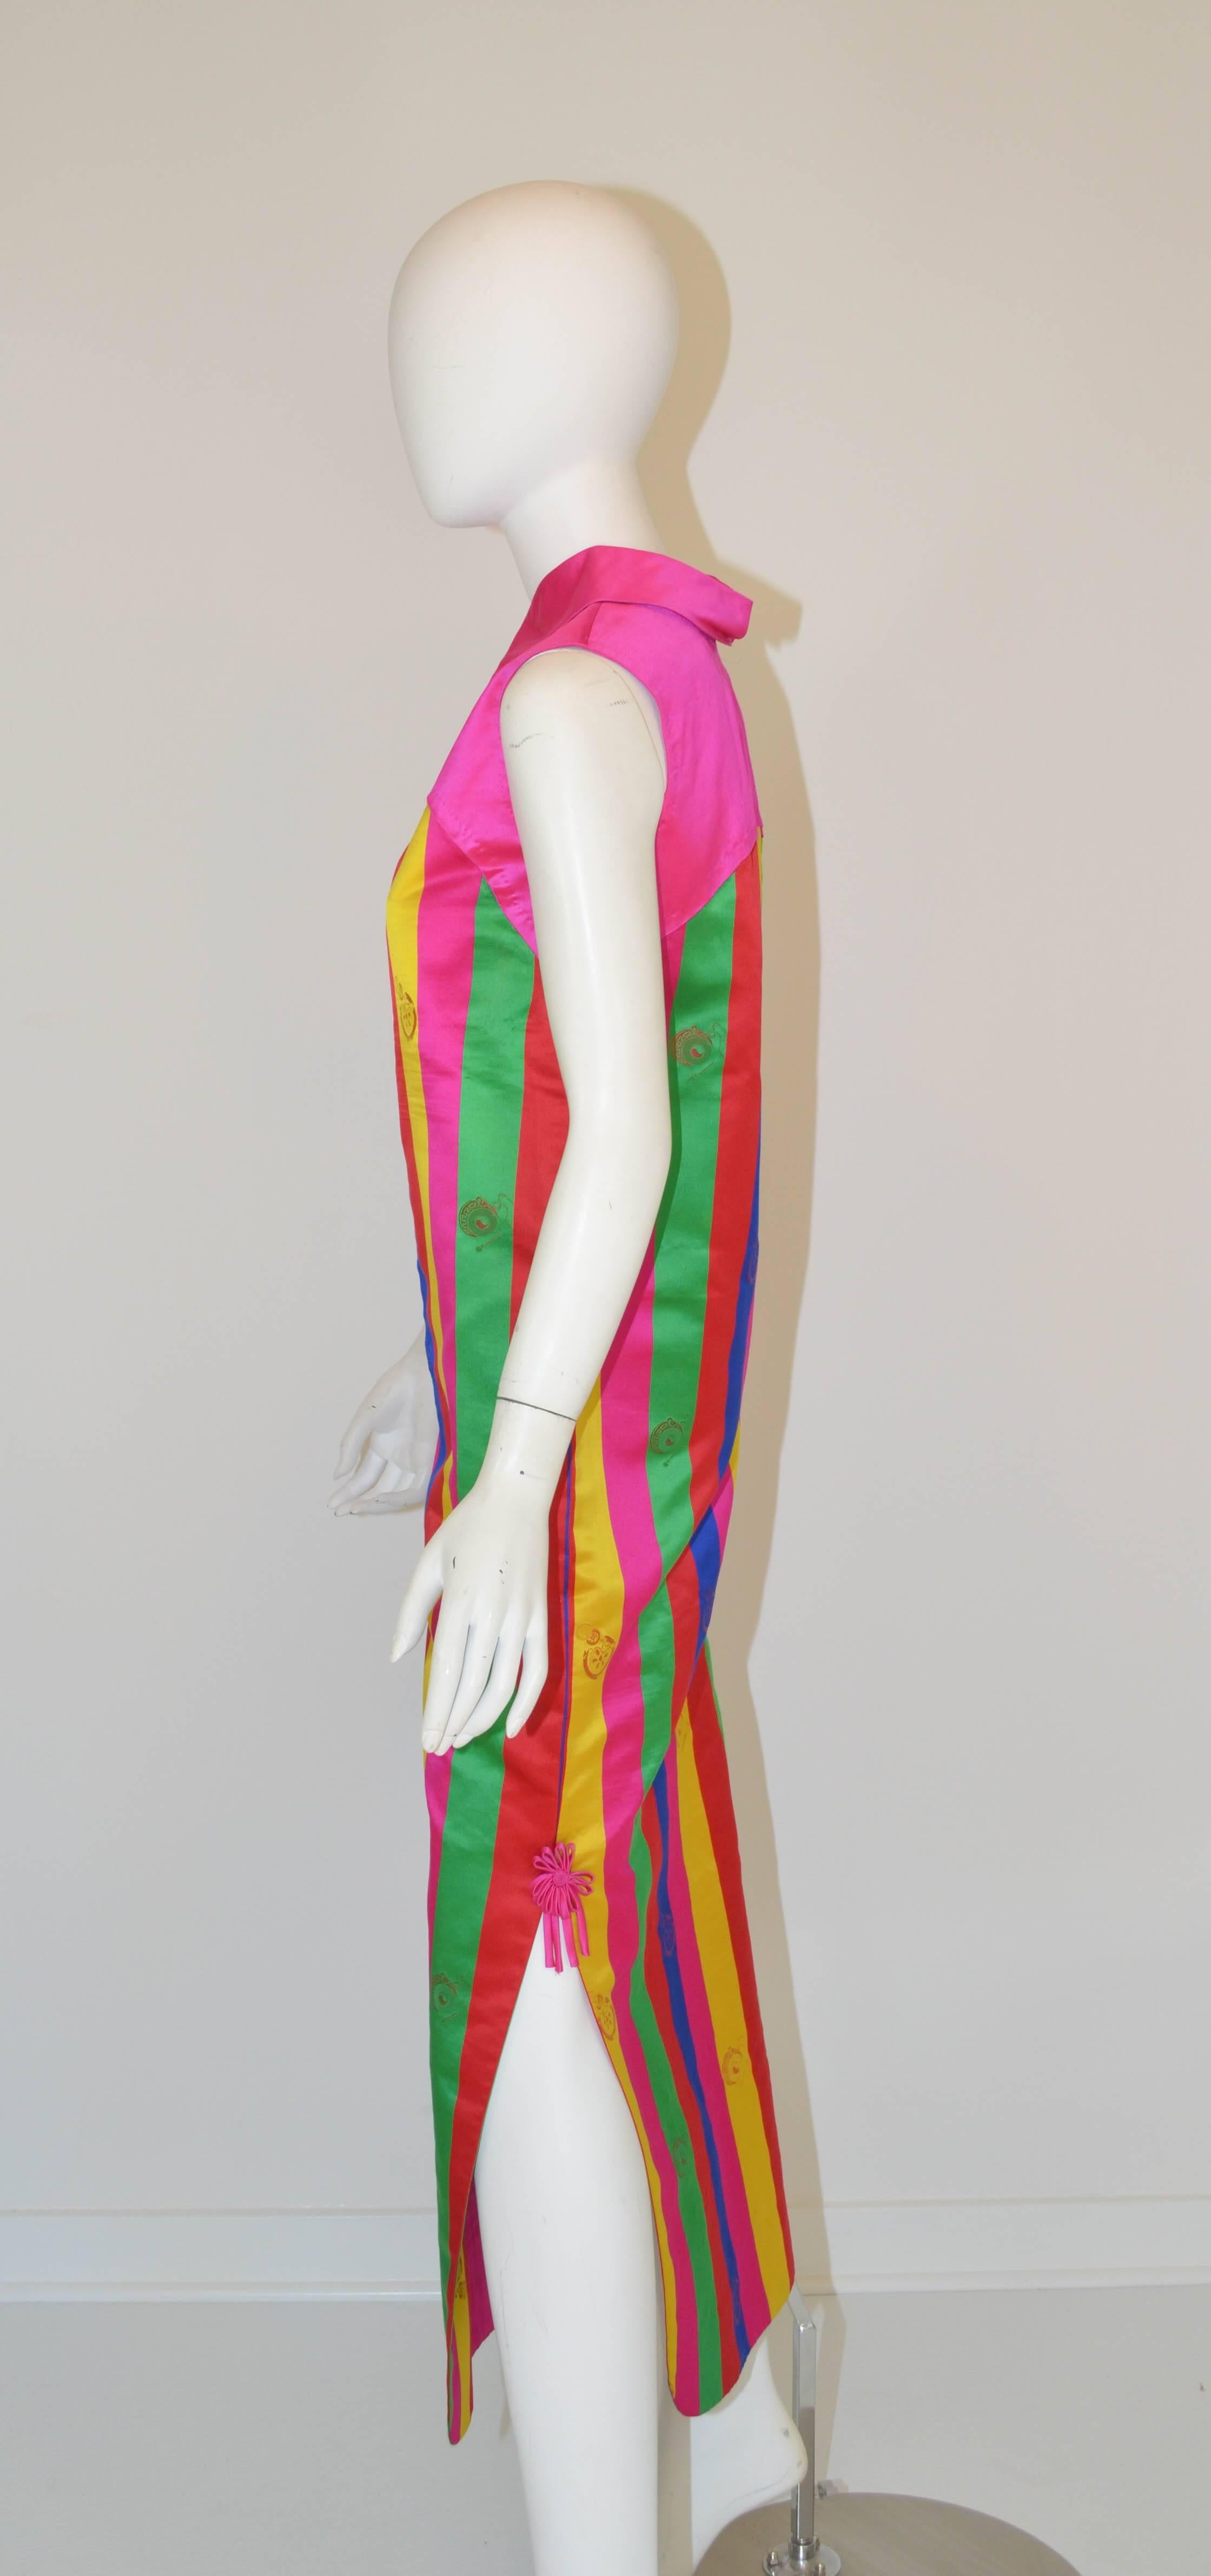 Nora Noh Korean Designer 1960's Silk Gown made from Korean imperial printed silk. 

Nora Noh is the subject of the 2013 Documentary where she is portrayed as one of Korea's greatest designers and the first female Korean designer.

Measurements:
Bust